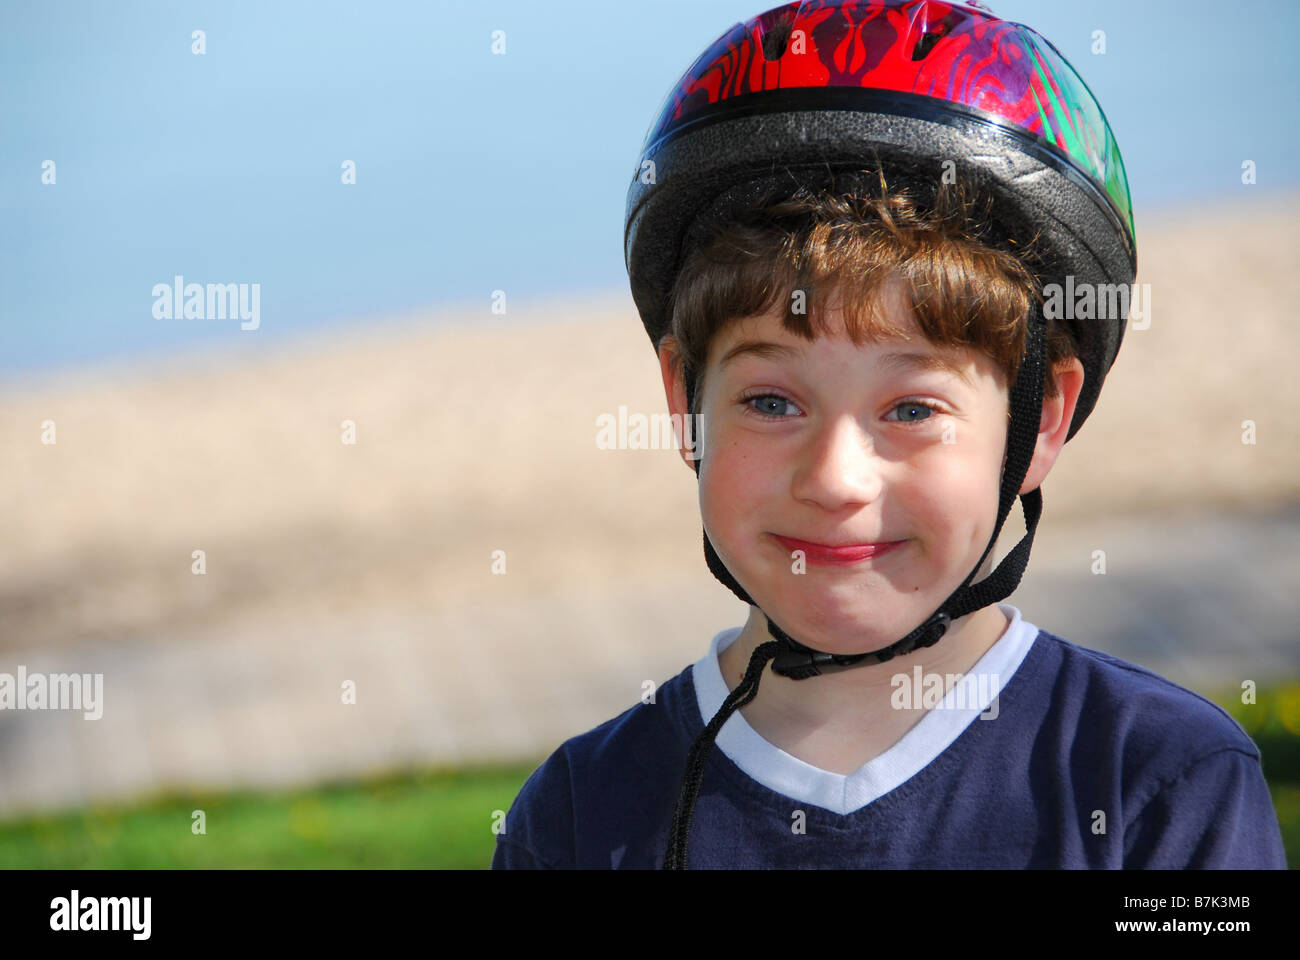 Portrait of a cute little boy in bicycle helmet making silly faces Stock Photo